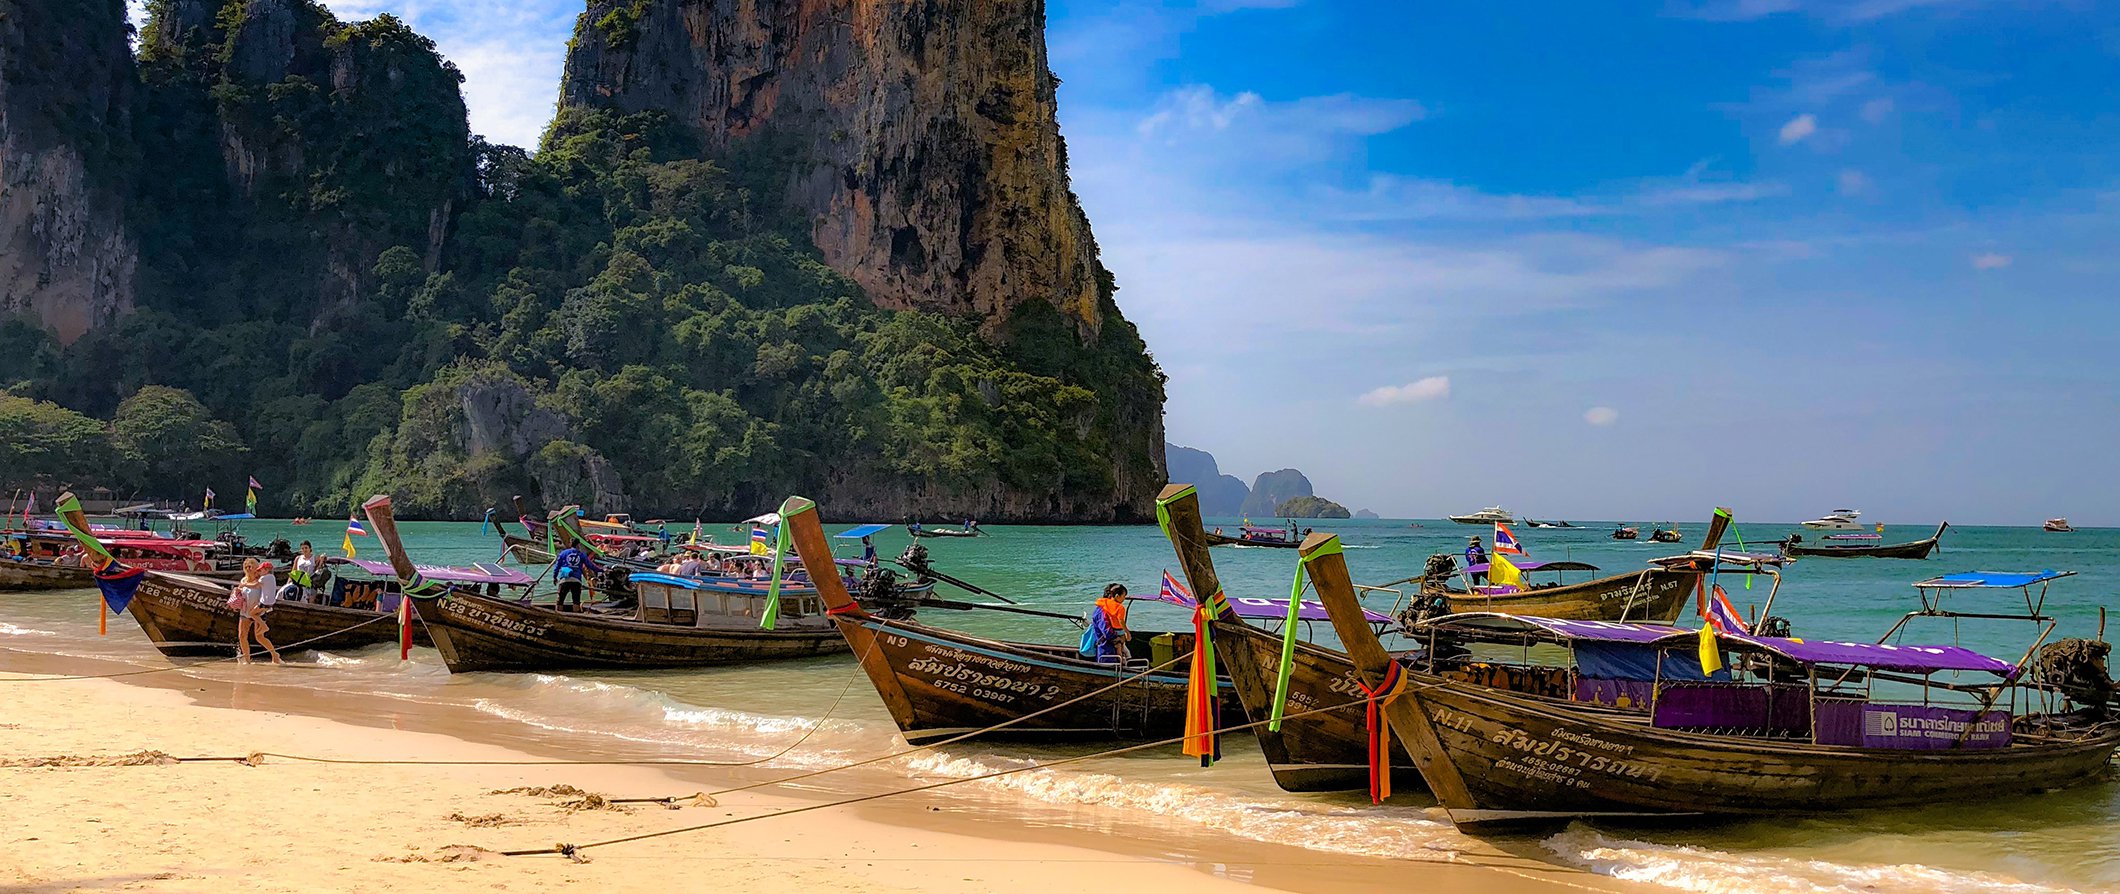 Backpackers Guide 8 Essential Tips for Backpacking in Thailand